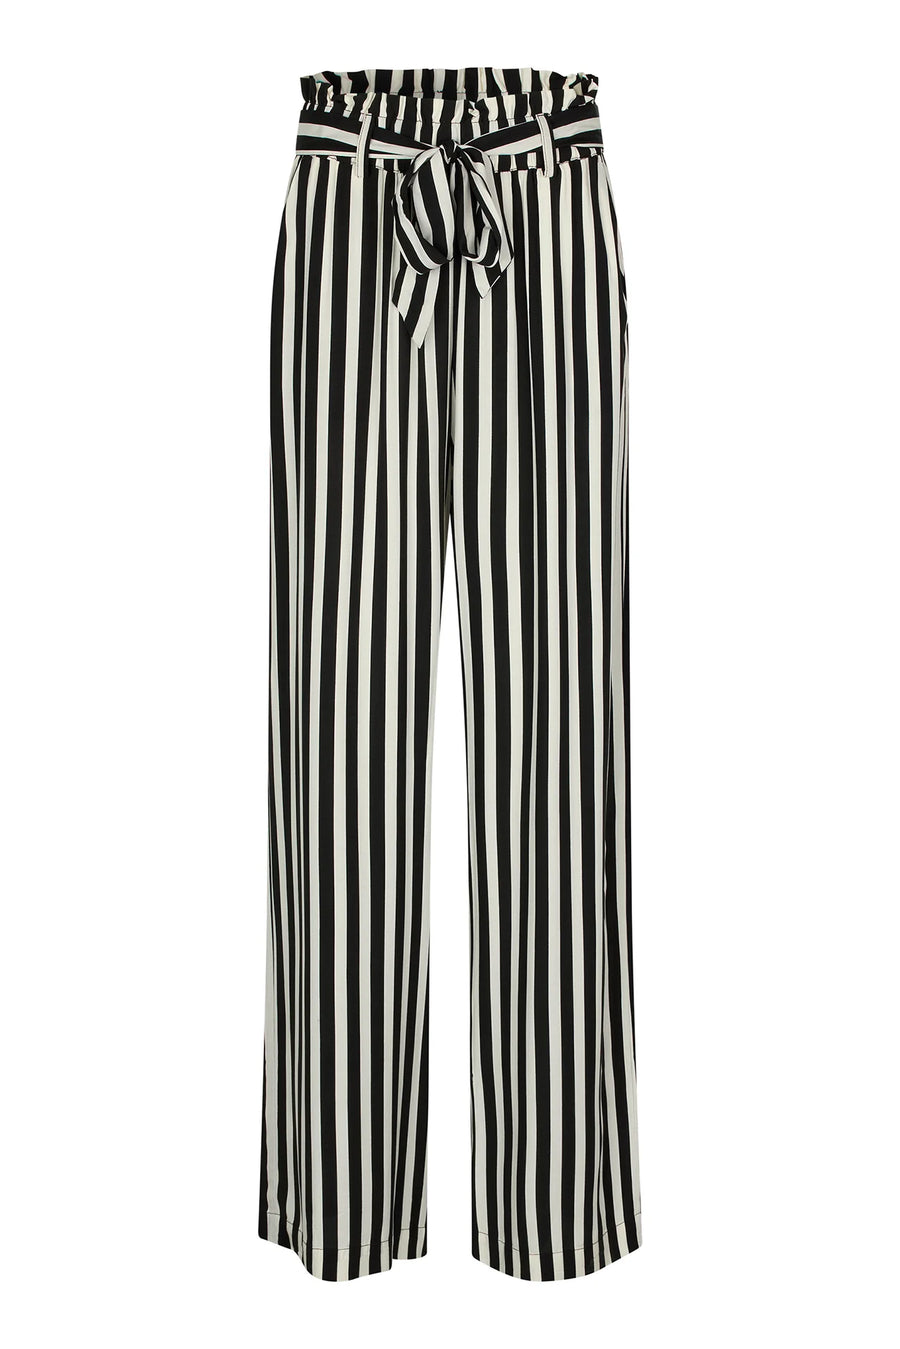 Lollys Laundry Vicky Trousers Black White Stripe